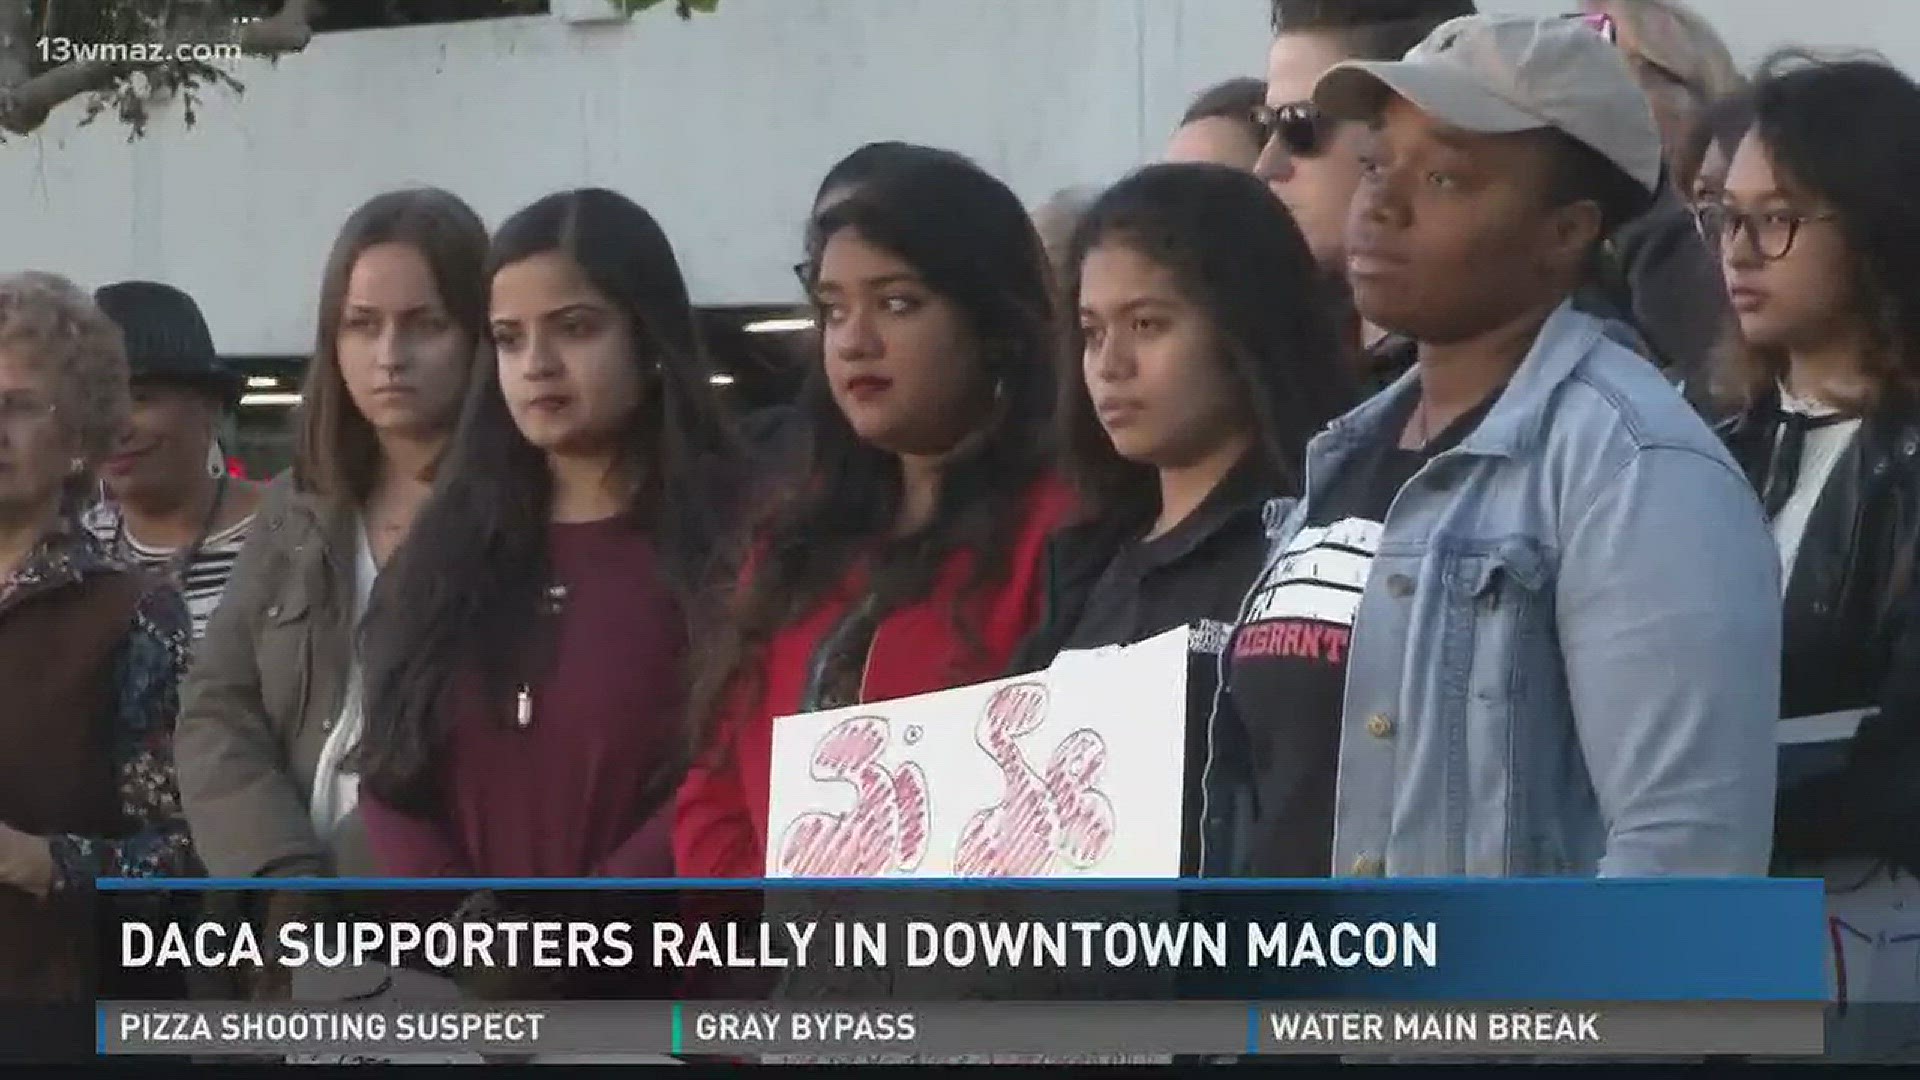 DACA supporters rally in downtown Macon